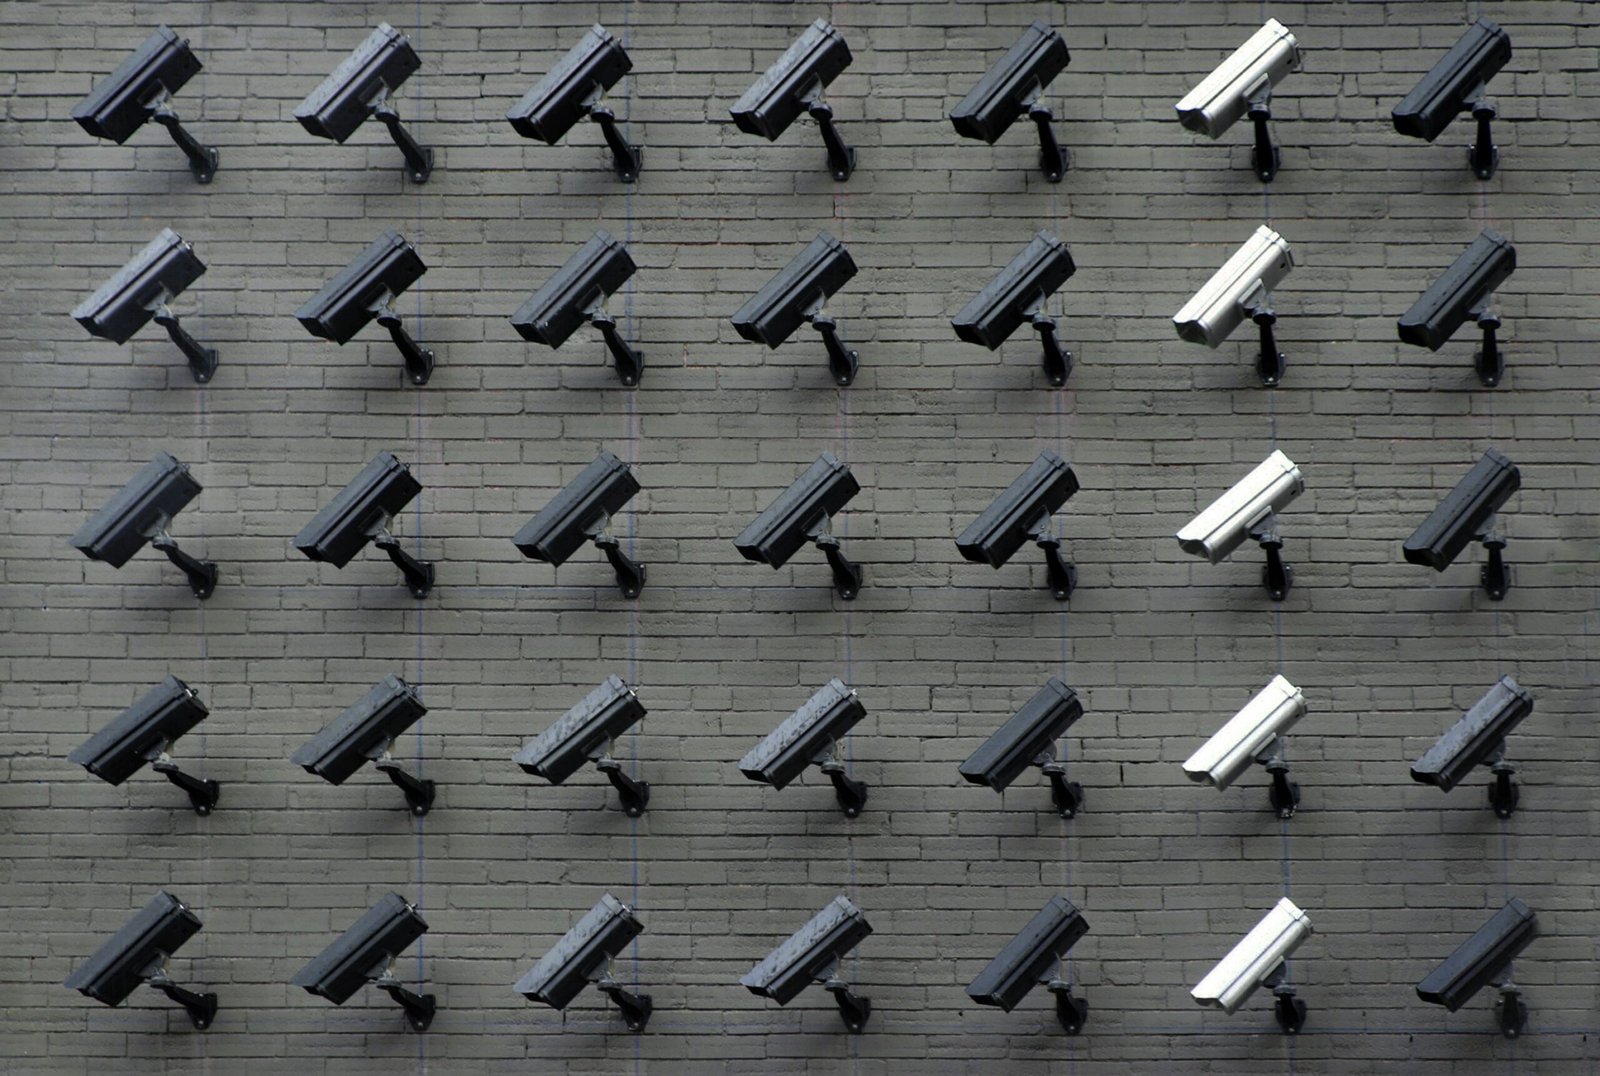 Living in a Surveillance-Driven Society: Implications and Resistance